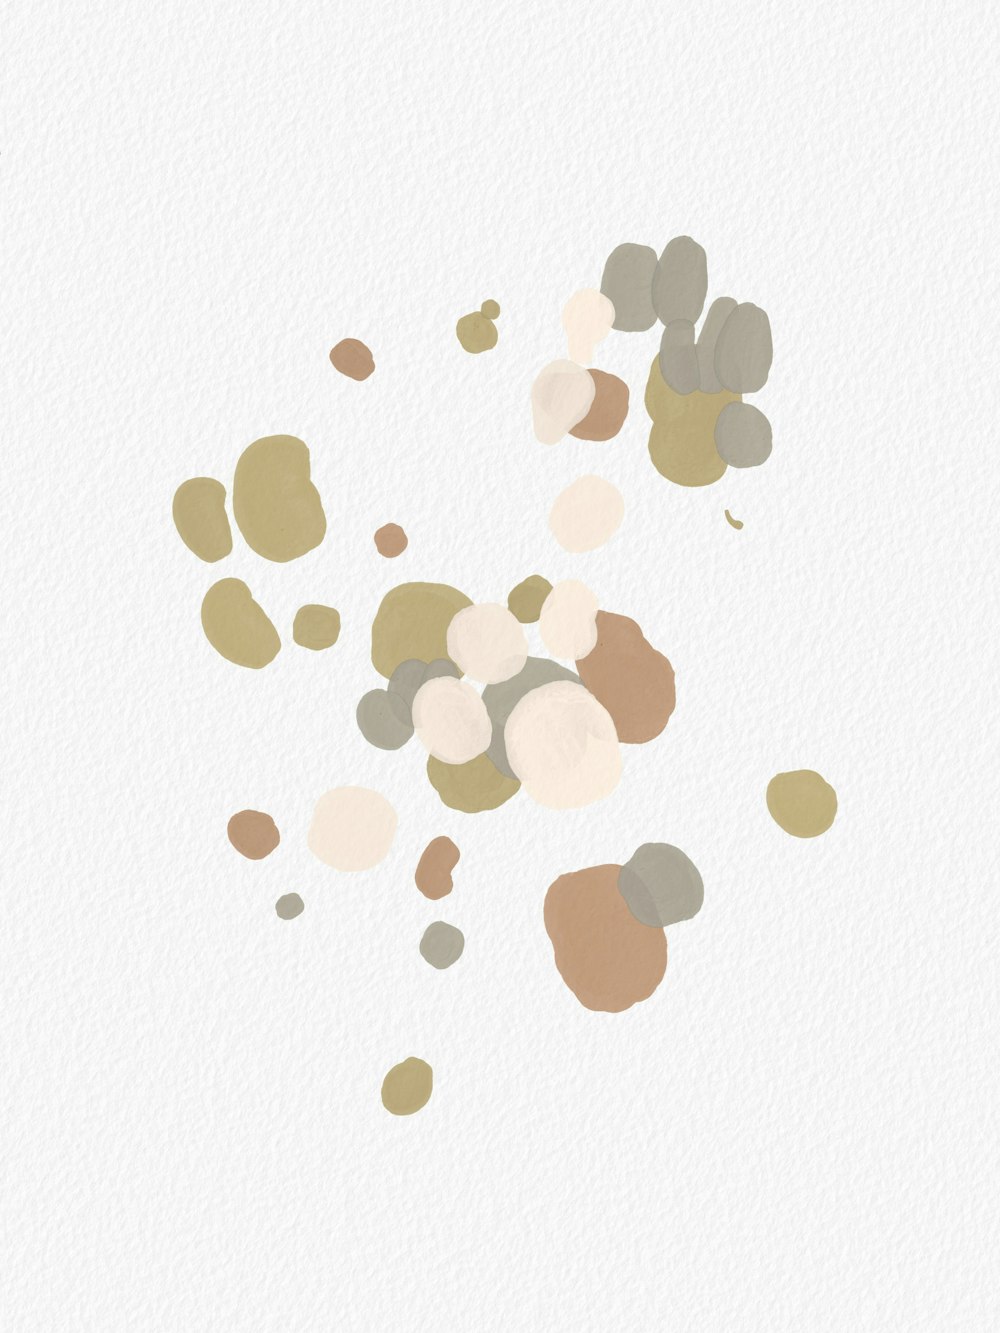 a white background with some brown and white circles